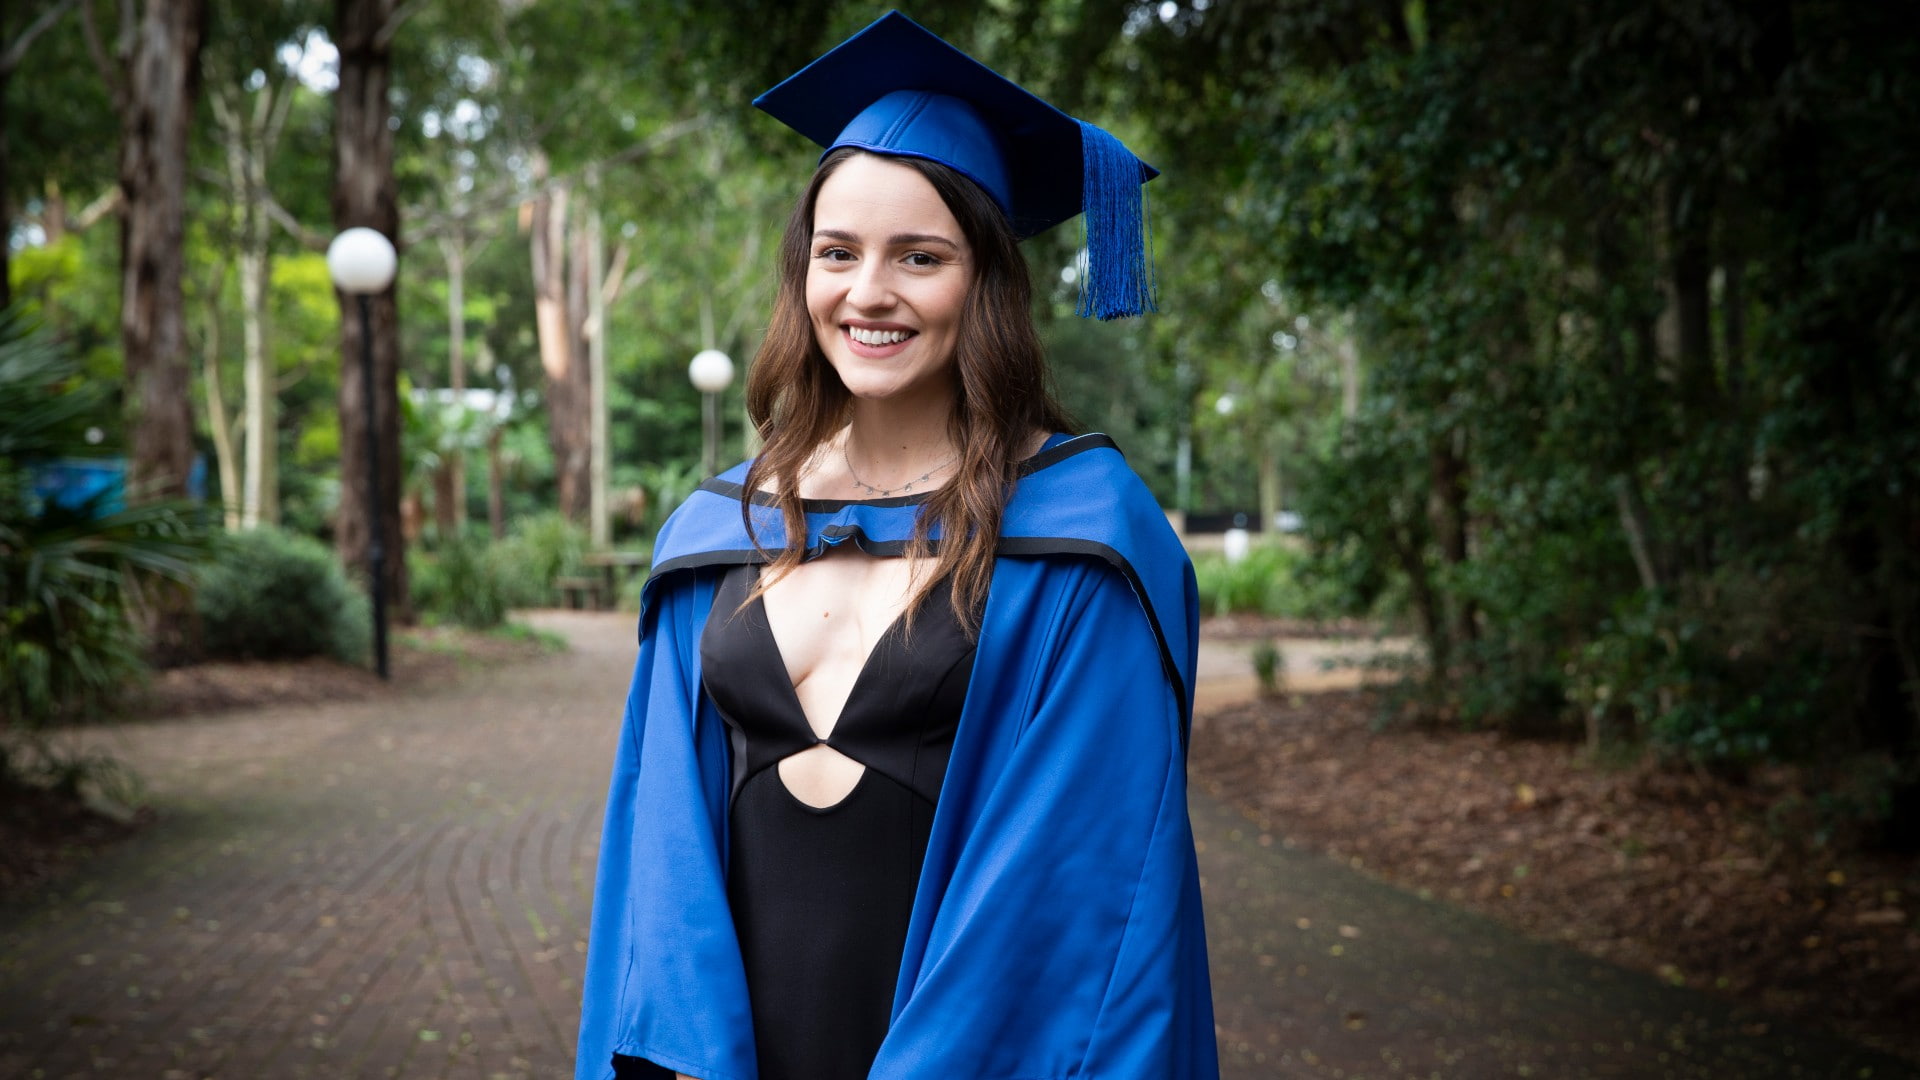 Biomedical engineering graduate Eileen Wallace in her graduation gown at UOW's Wollongong campus. Photo: Paul Jones